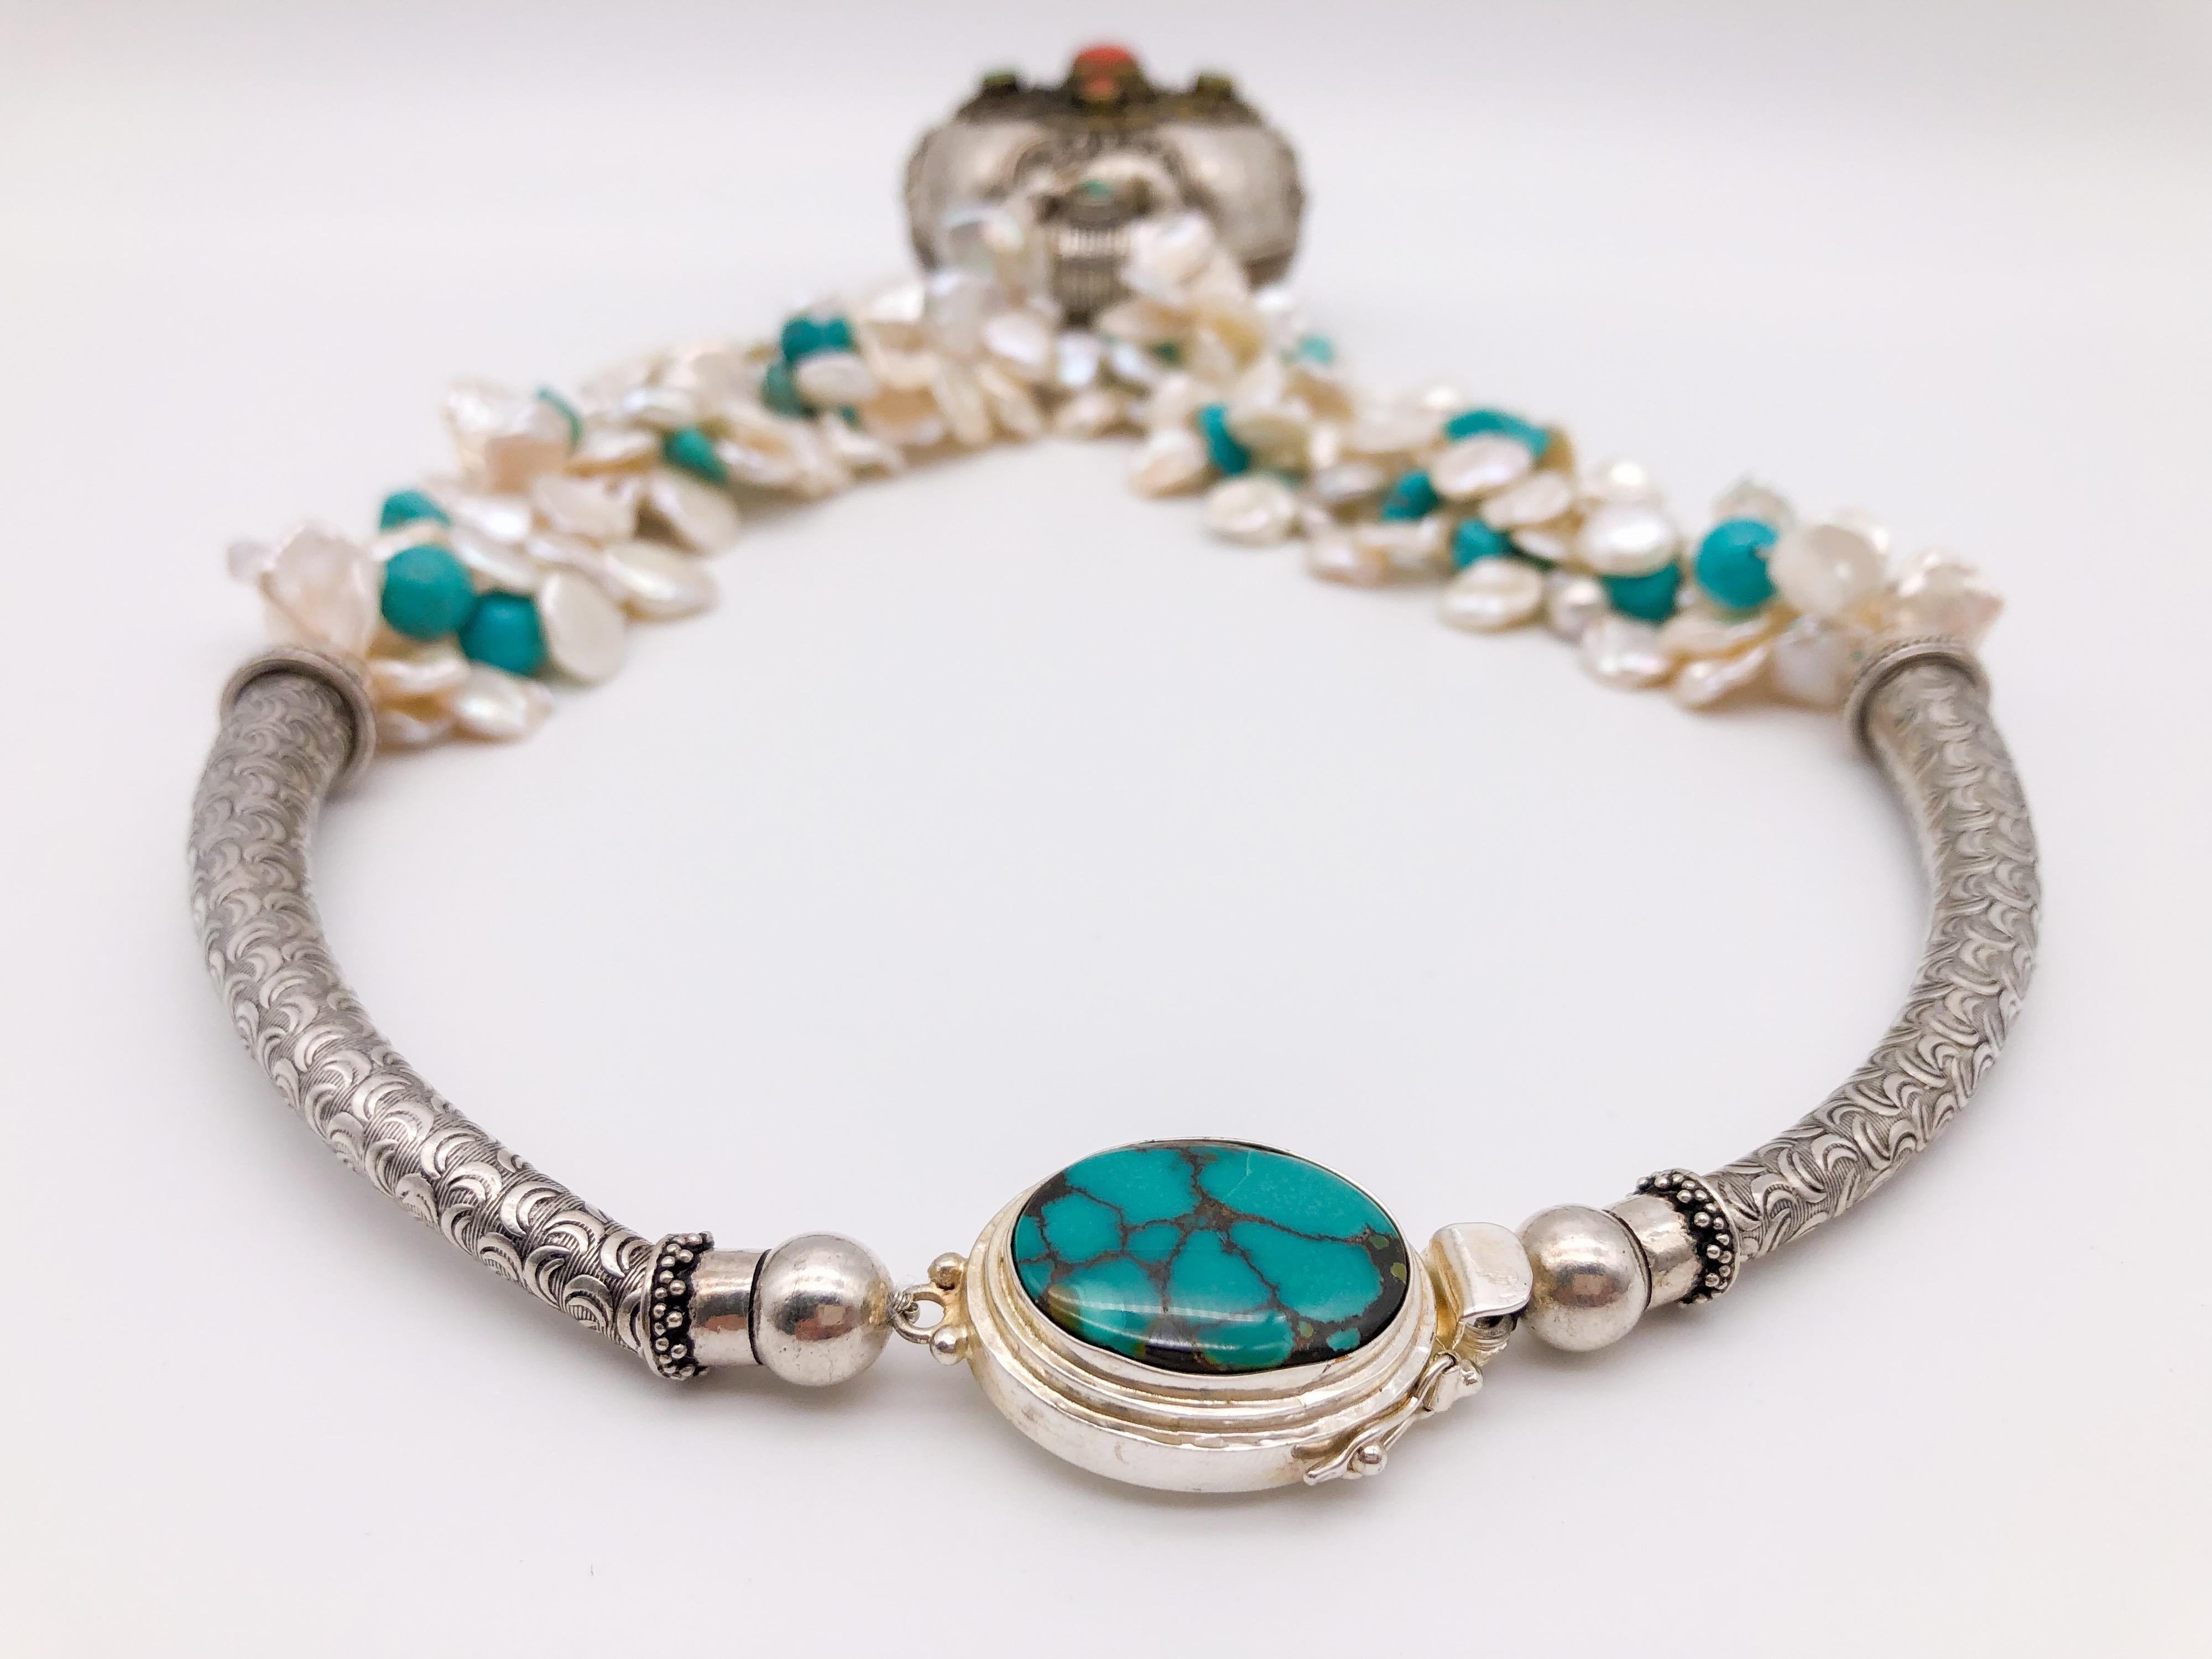 A.Jeschel Traditional Tibetan Ghau Box pendant with Turquoise and Keshi Pearls For Sale 4